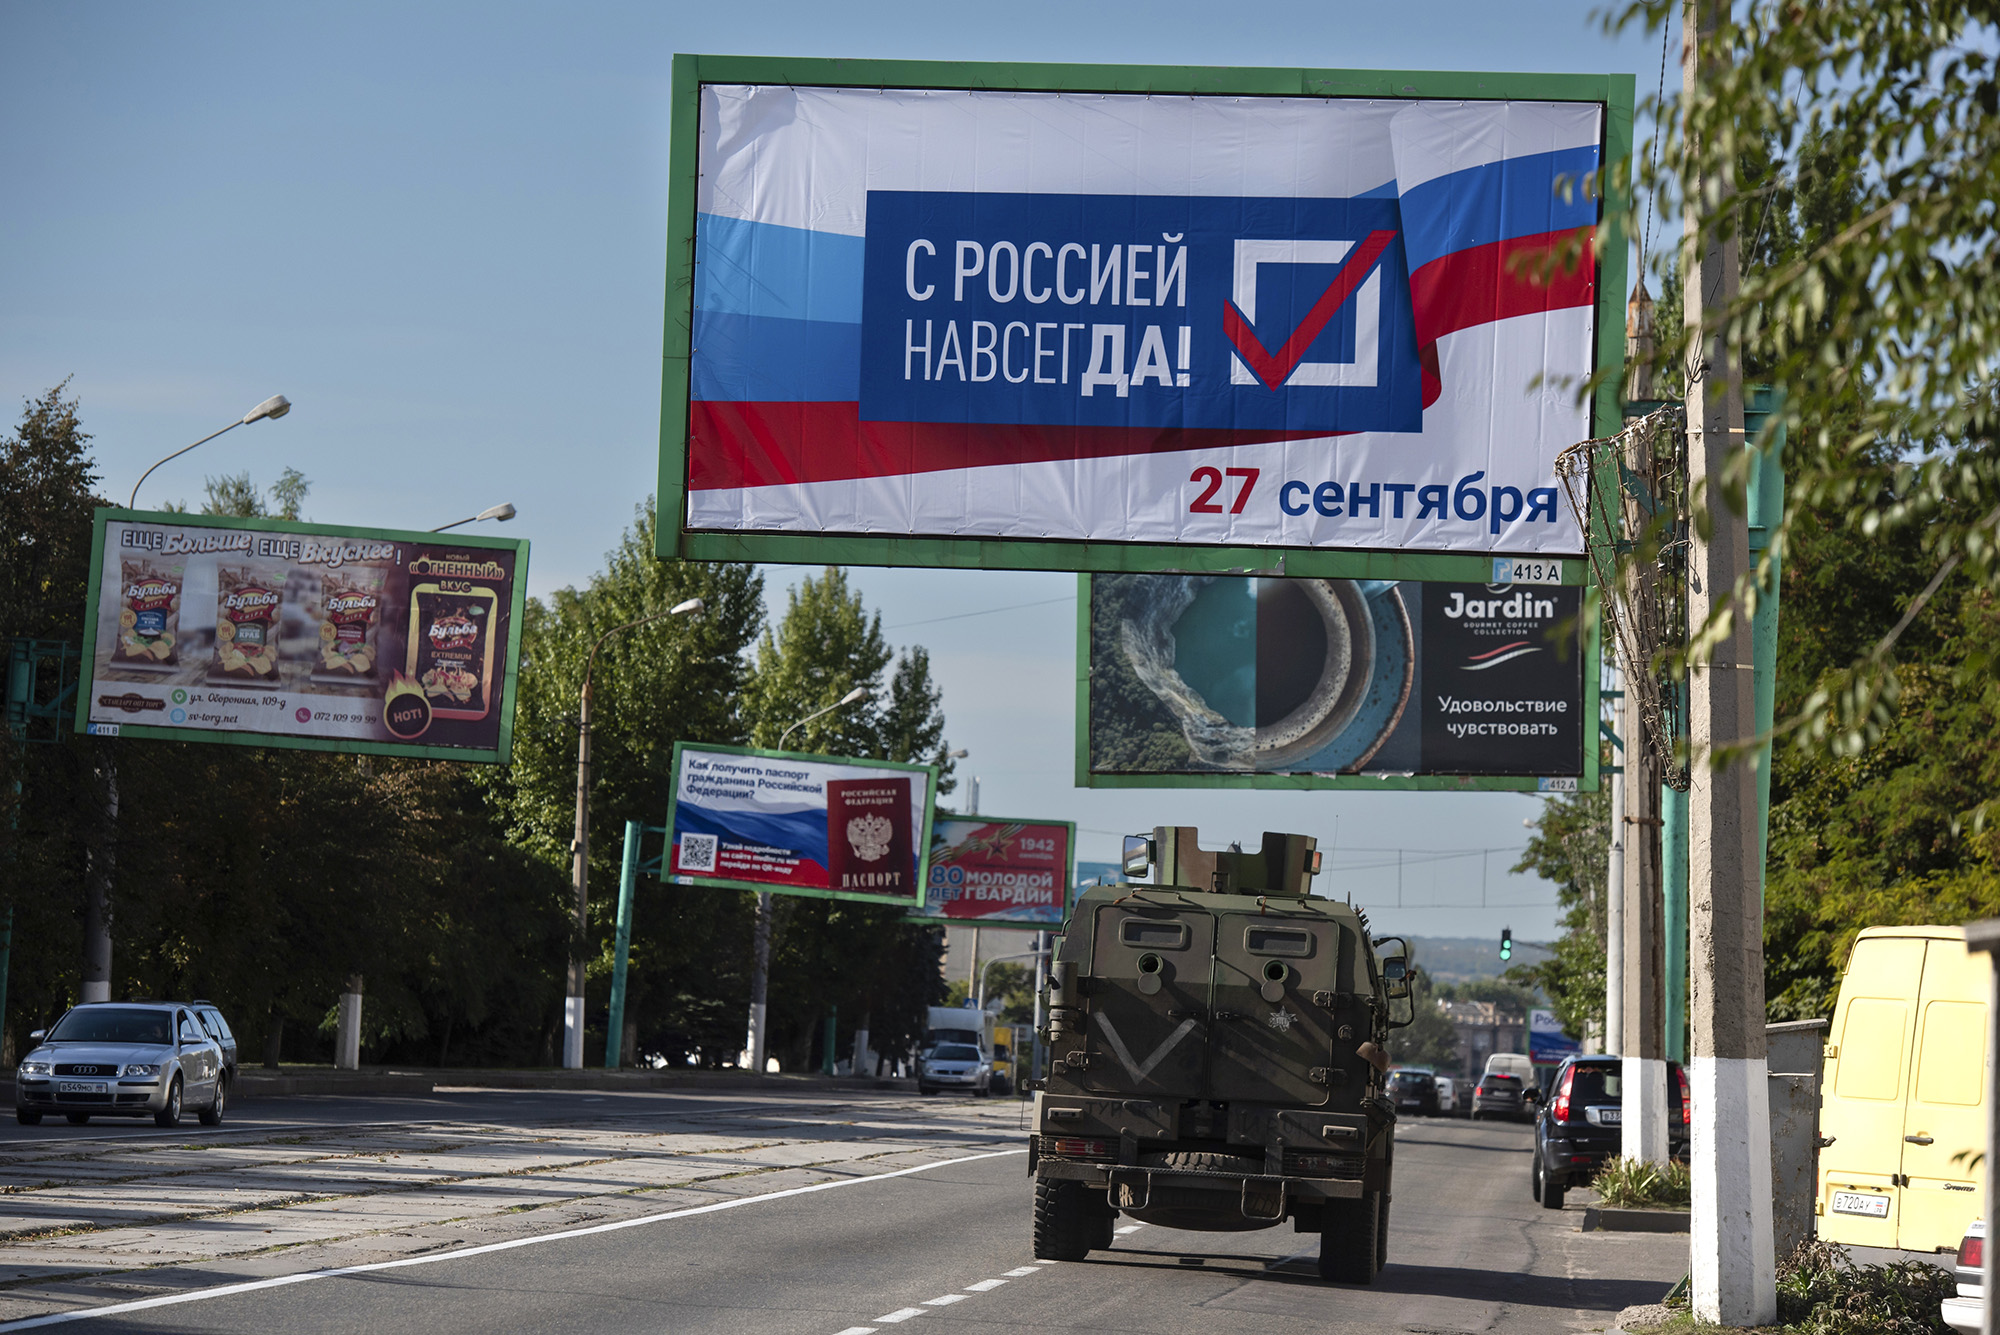 A military vehicle drives along a street with a billboard "With Russia forever, September 27" ahead of a referendum in Luhansk, eastern Ukraine, on September 22.